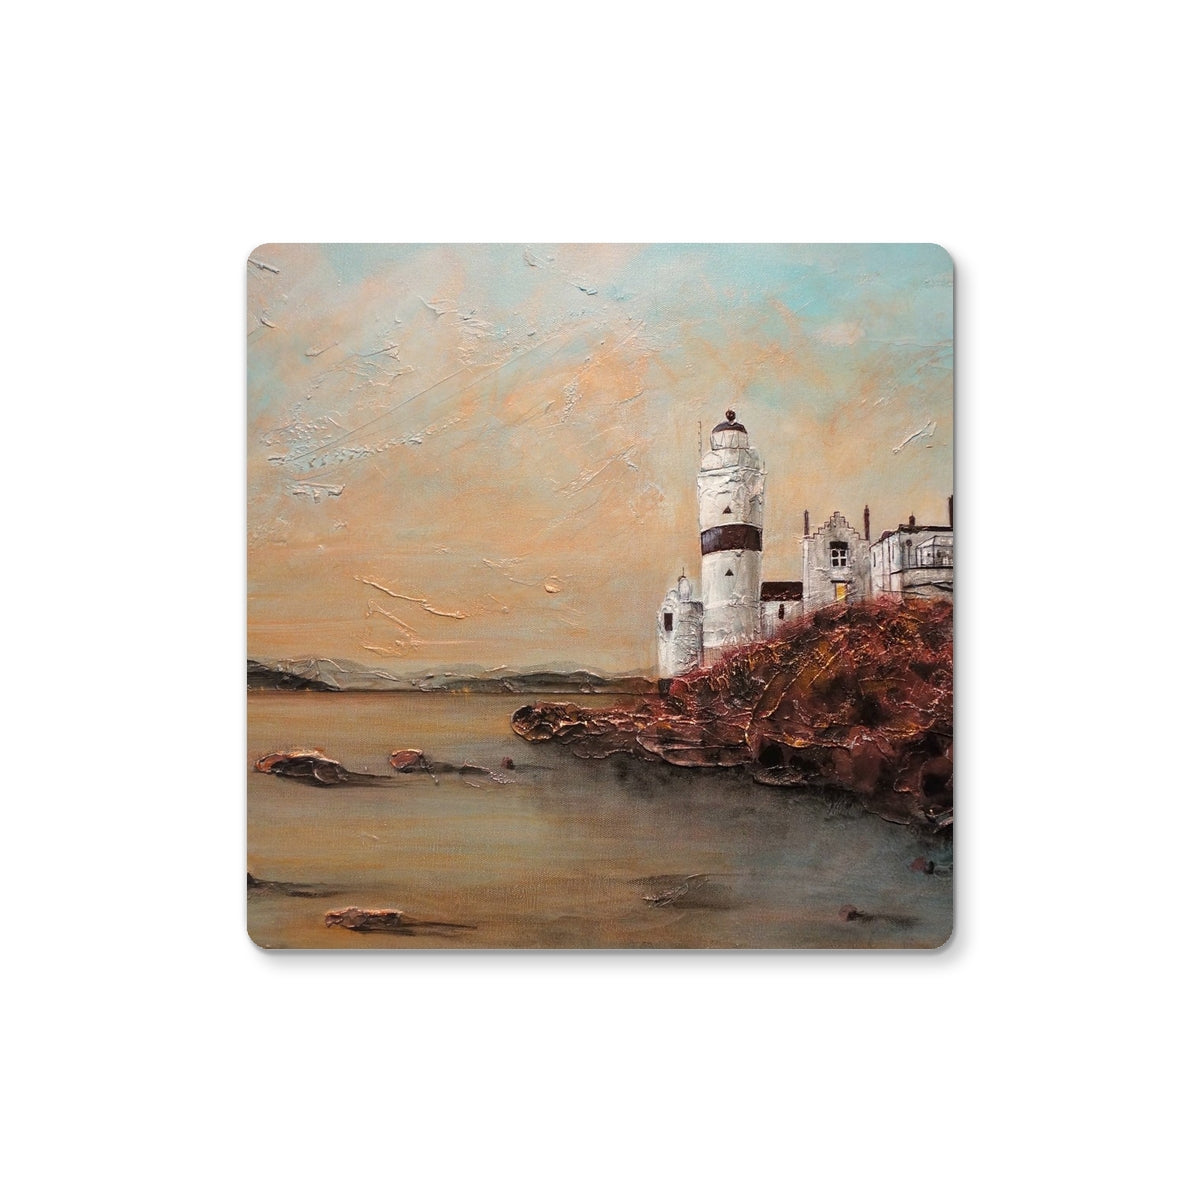 Cloch Lighthouse Dawn Art Gifts Coaster-Homeware-River Clyde Art Gallery-2 Coasters-Paintings, Prints, Homeware, Art Gifts From Scotland By Scottish Artist Kevin Hunter